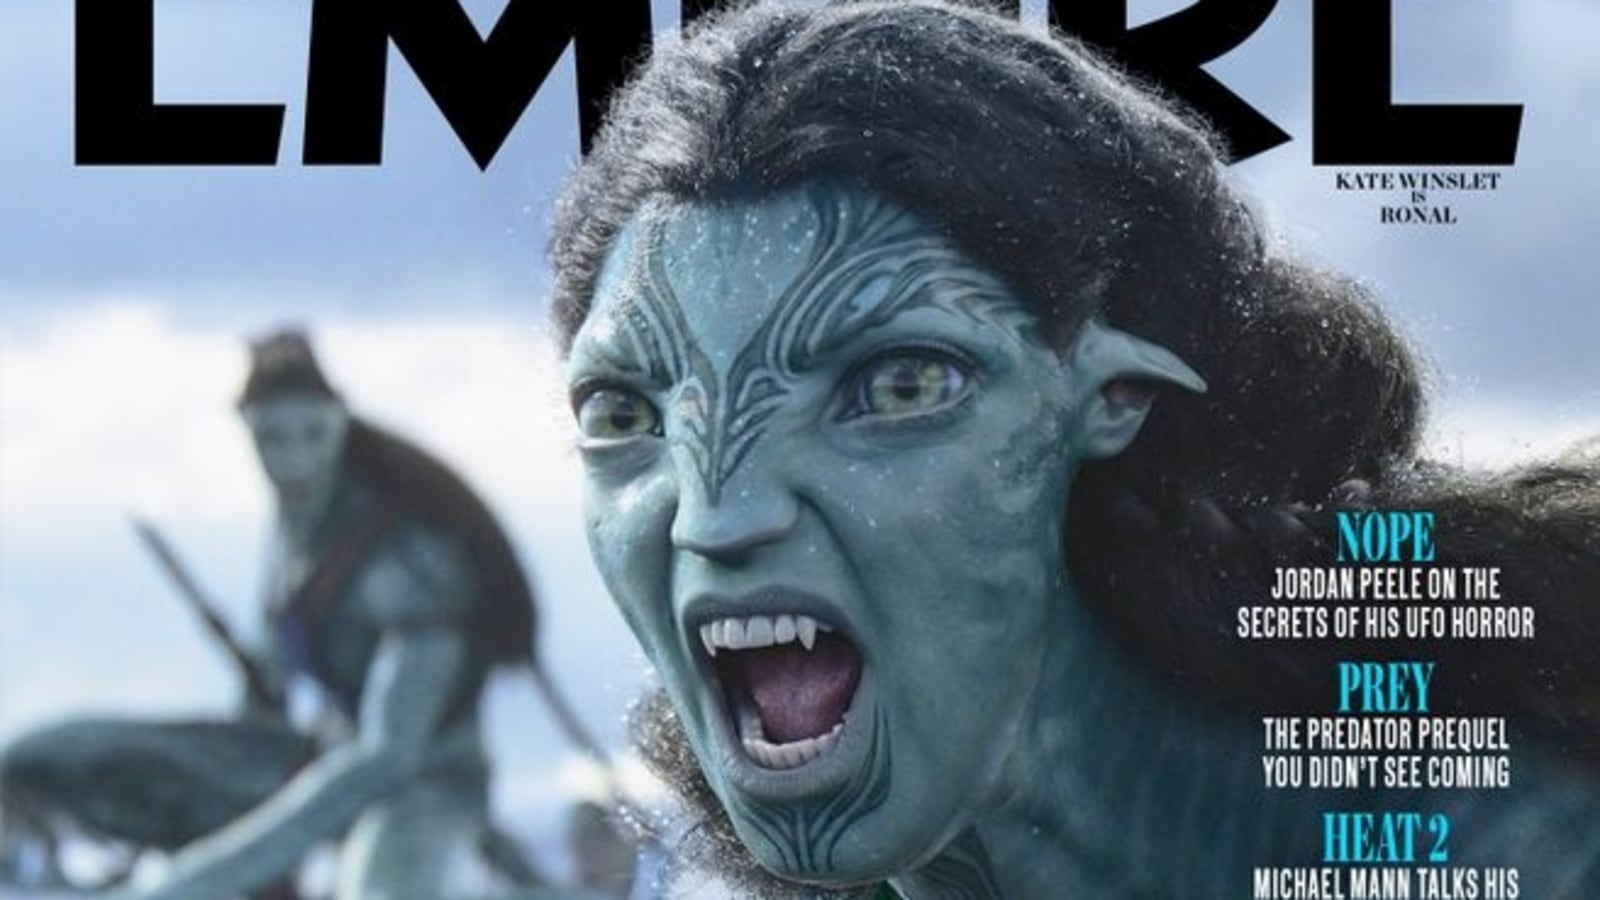 Avatar The Way of Water: Kate Winslet's look as Na'vi warrior Ronal revealed